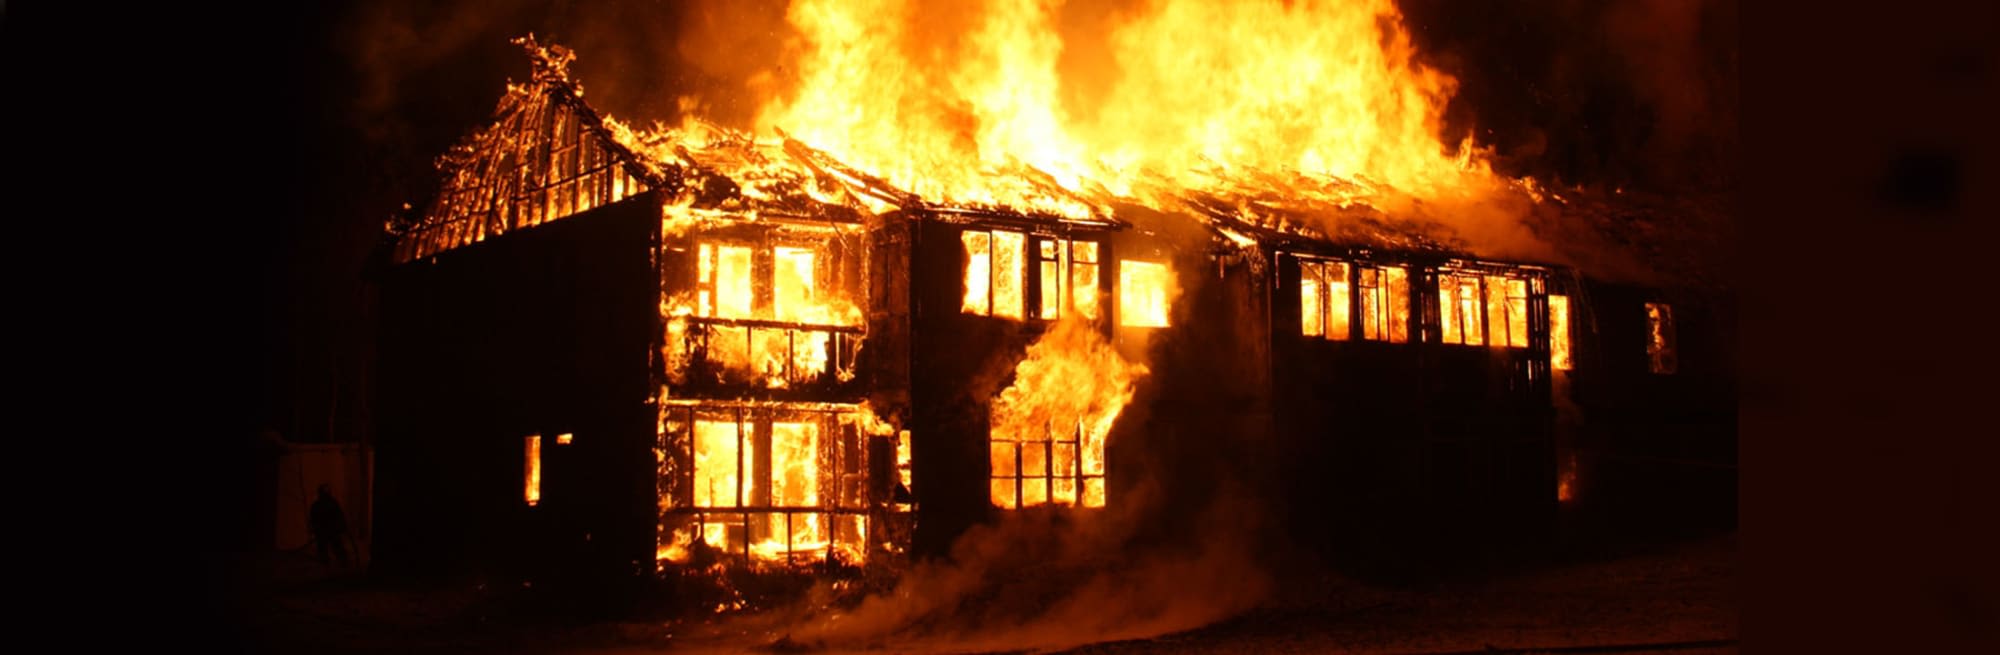 image of a burning building